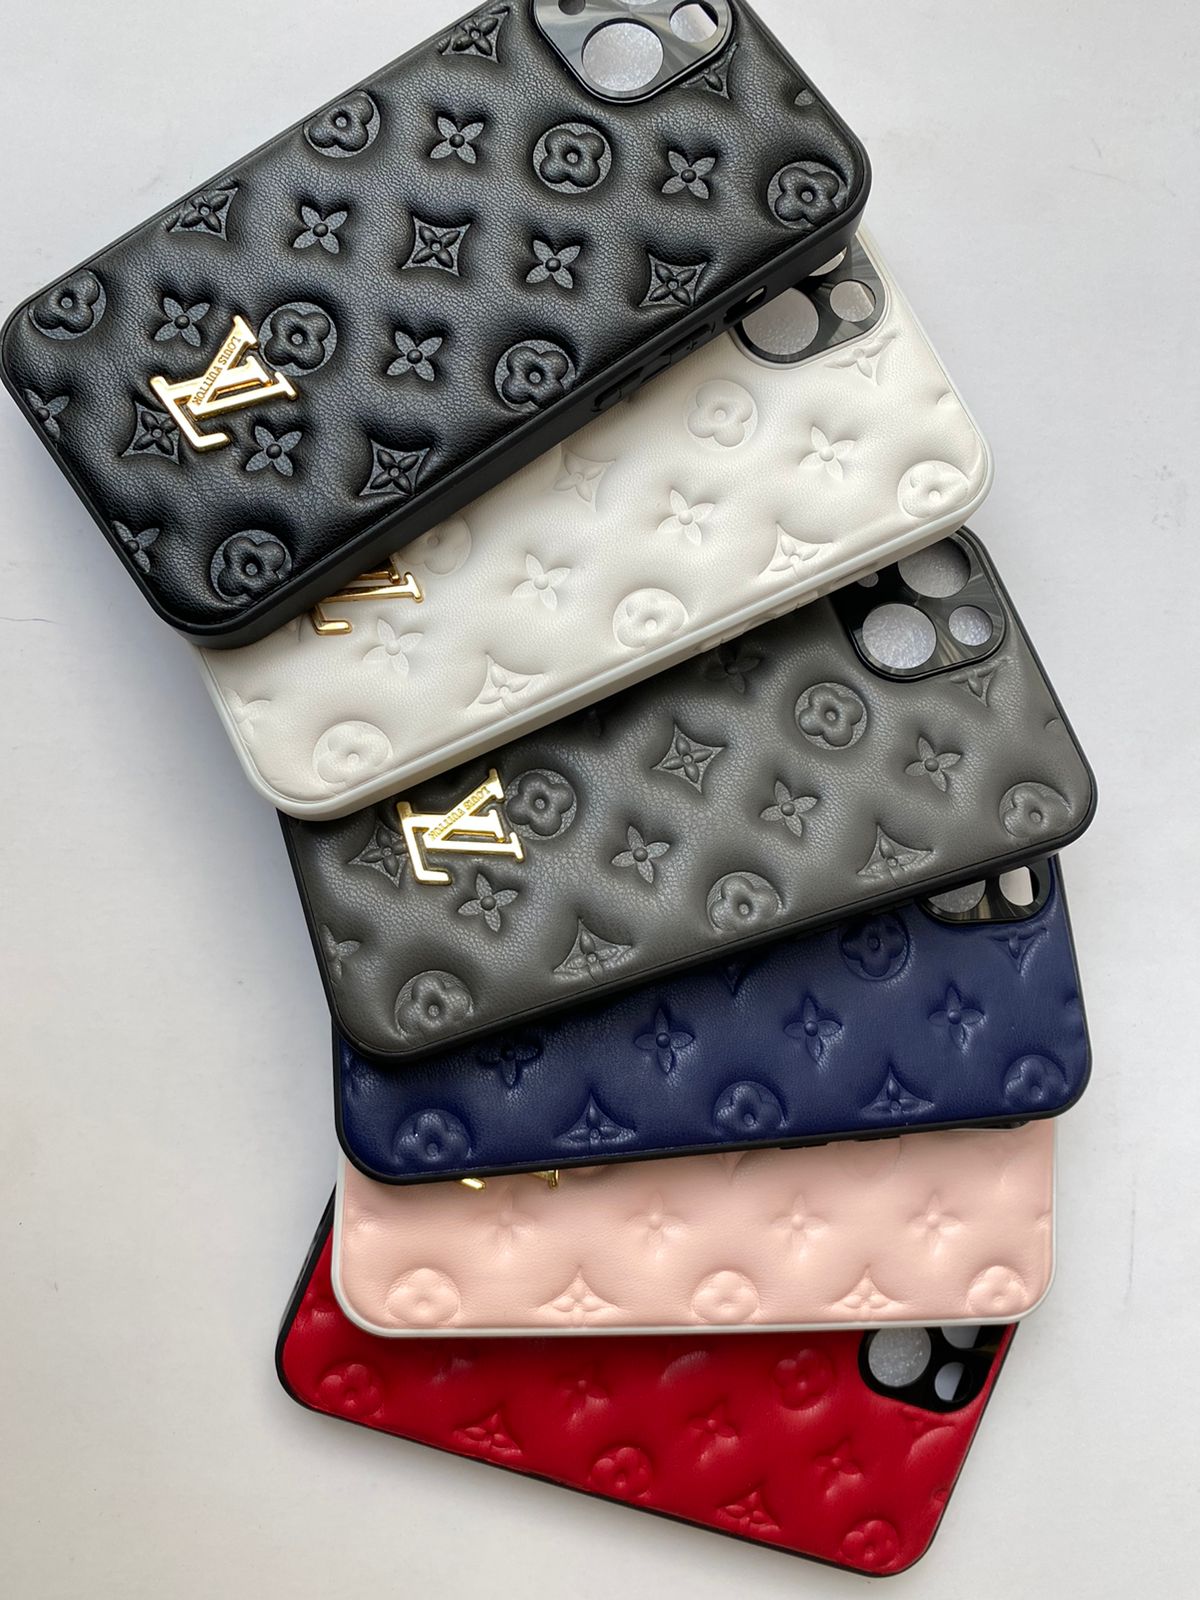 LV Printed Leather Case Cover For Iphone 12